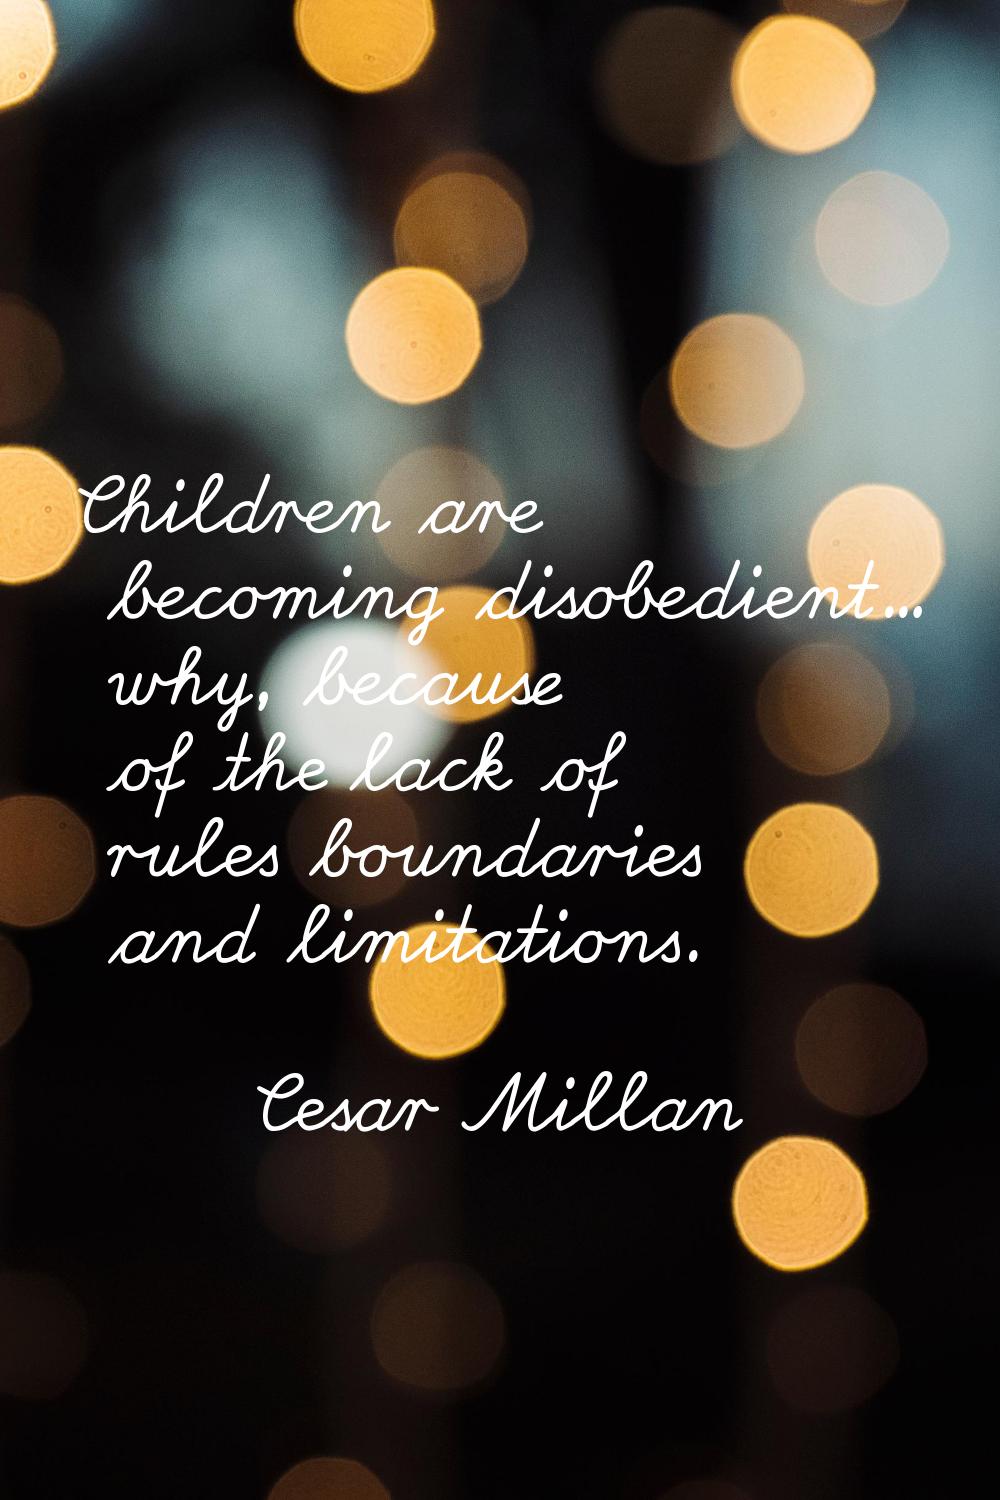 Children are becoming disobedient... why, because of the lack of rules boundaries and limitations.